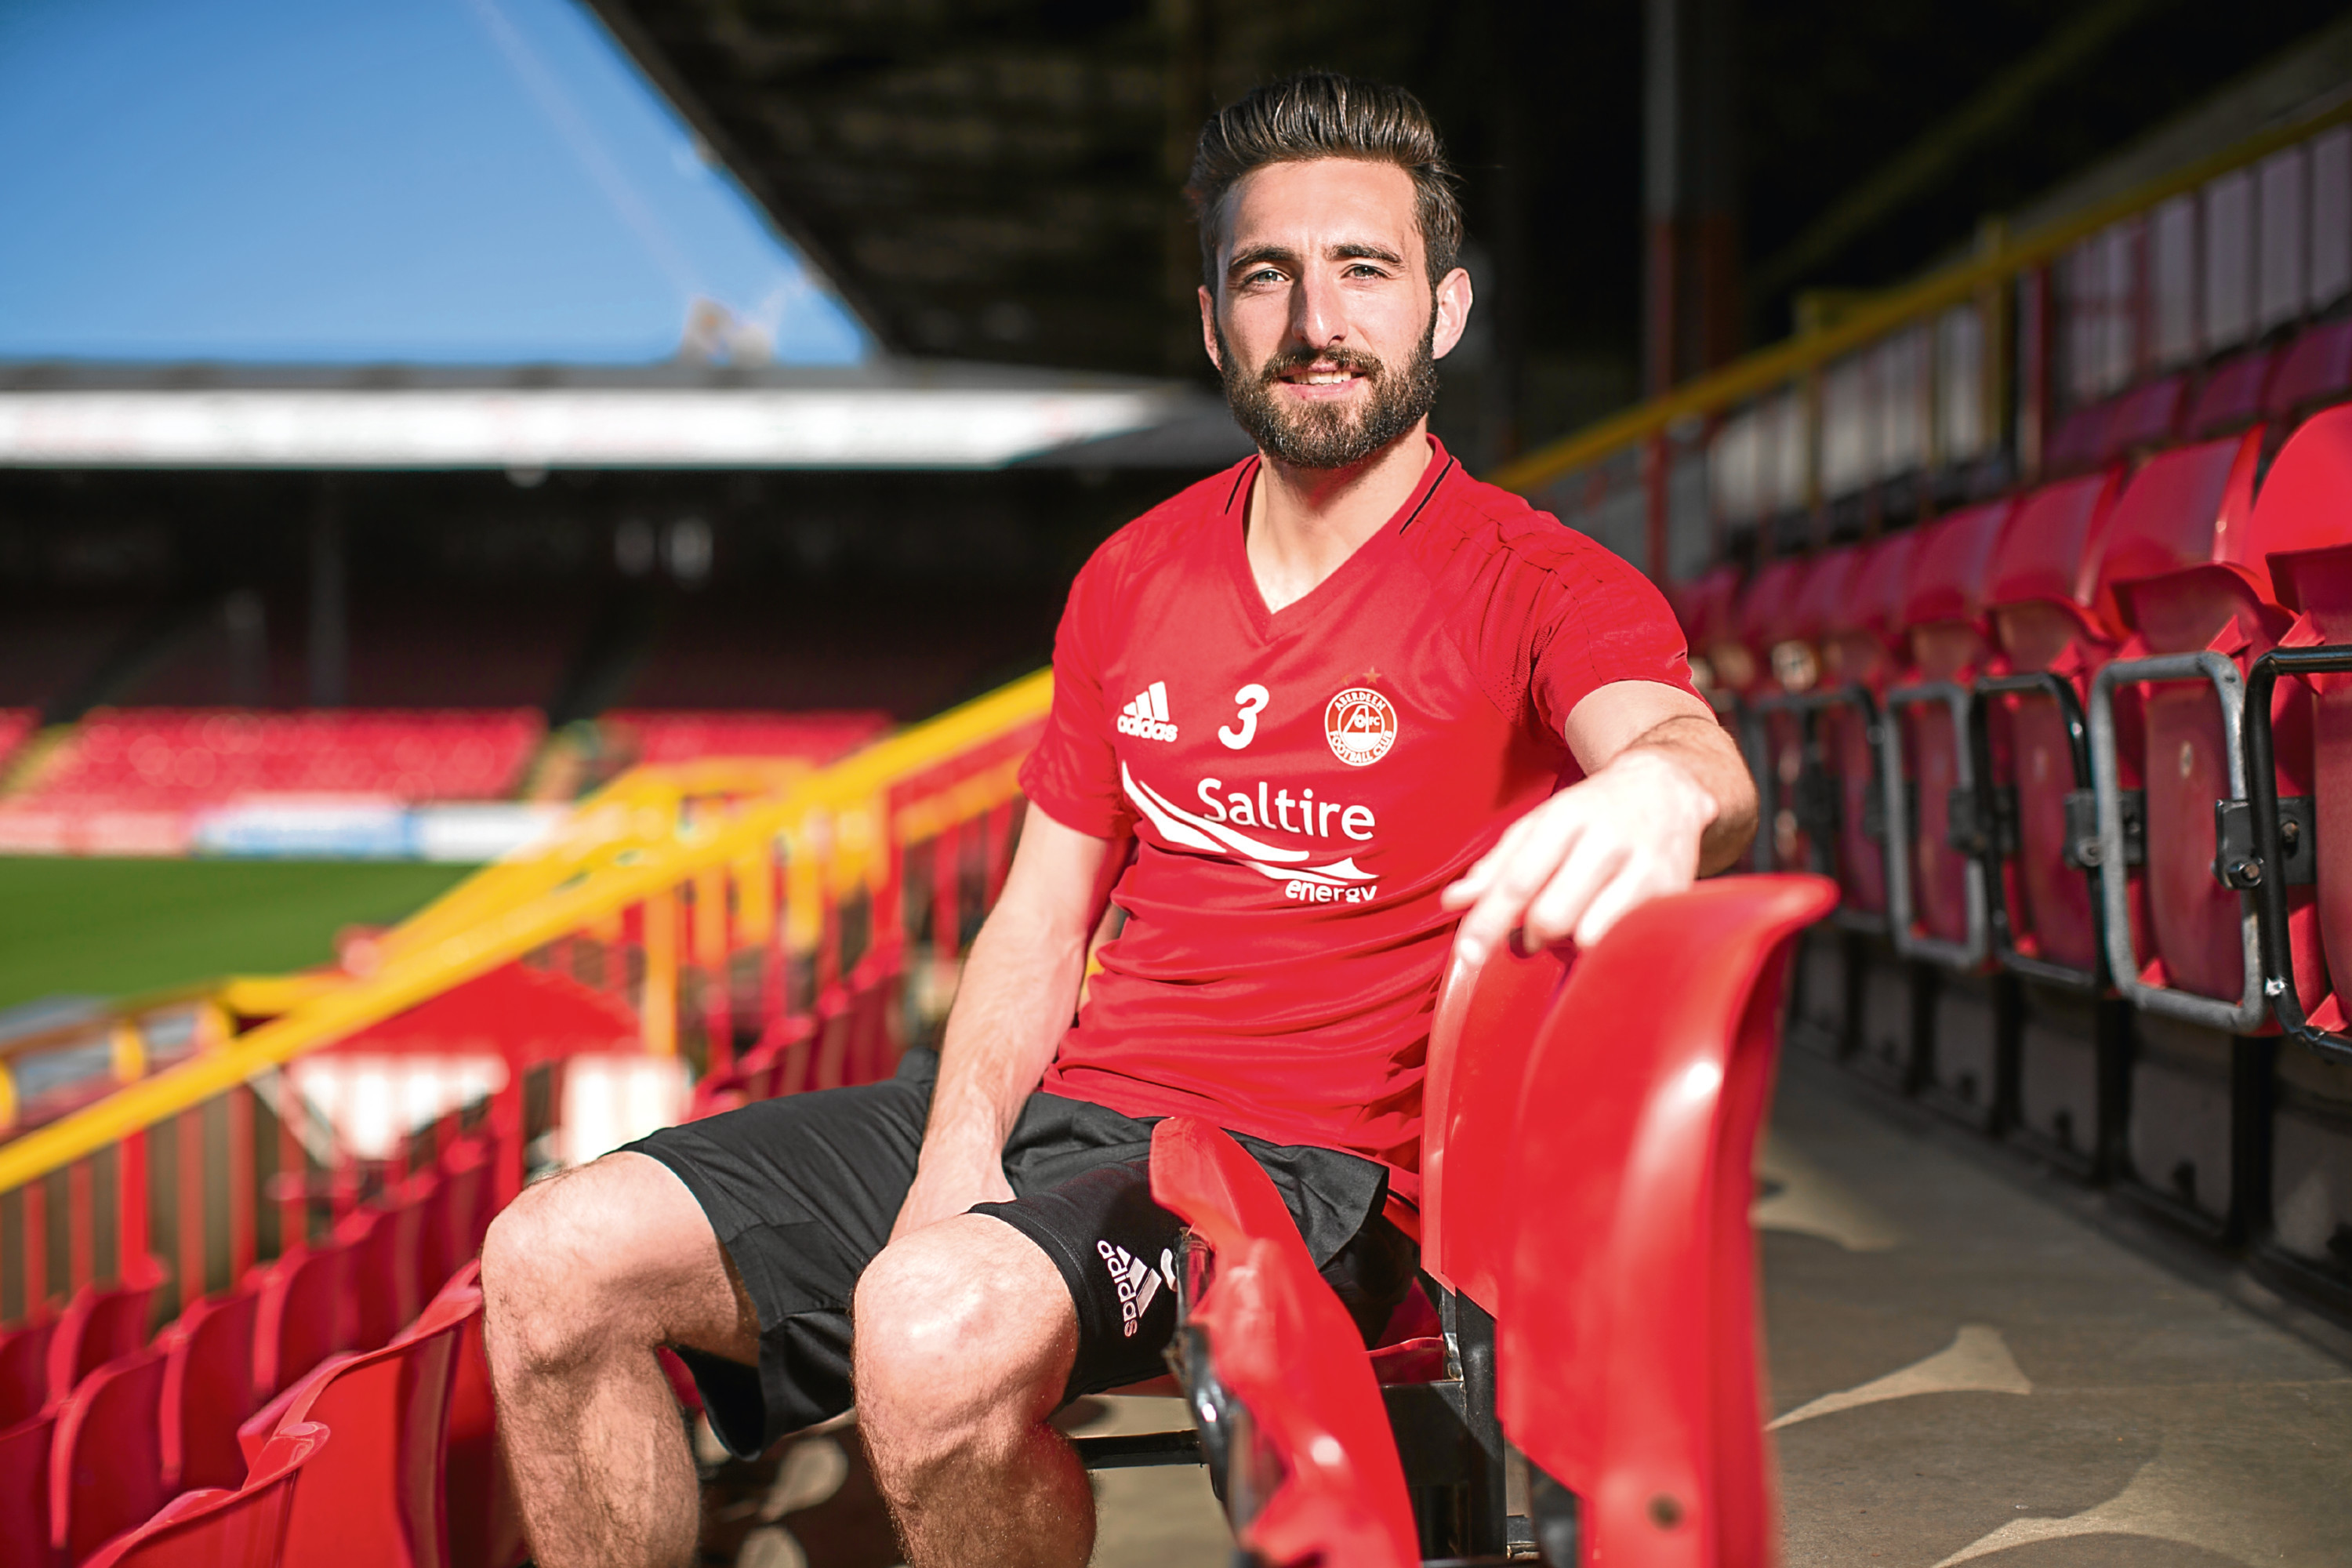 Friday 20th April 2018, Aberdeen, Scotland - Aberdeen Football Club press conference ahead of the Ladbrokes SPFL Premiership on Saturday against Kilmarnock FC at Rugby Park.

Pictured: Aberdeen Captain Graeme Shinnie 

(Photo: Ross Johnston/Newsline Media)